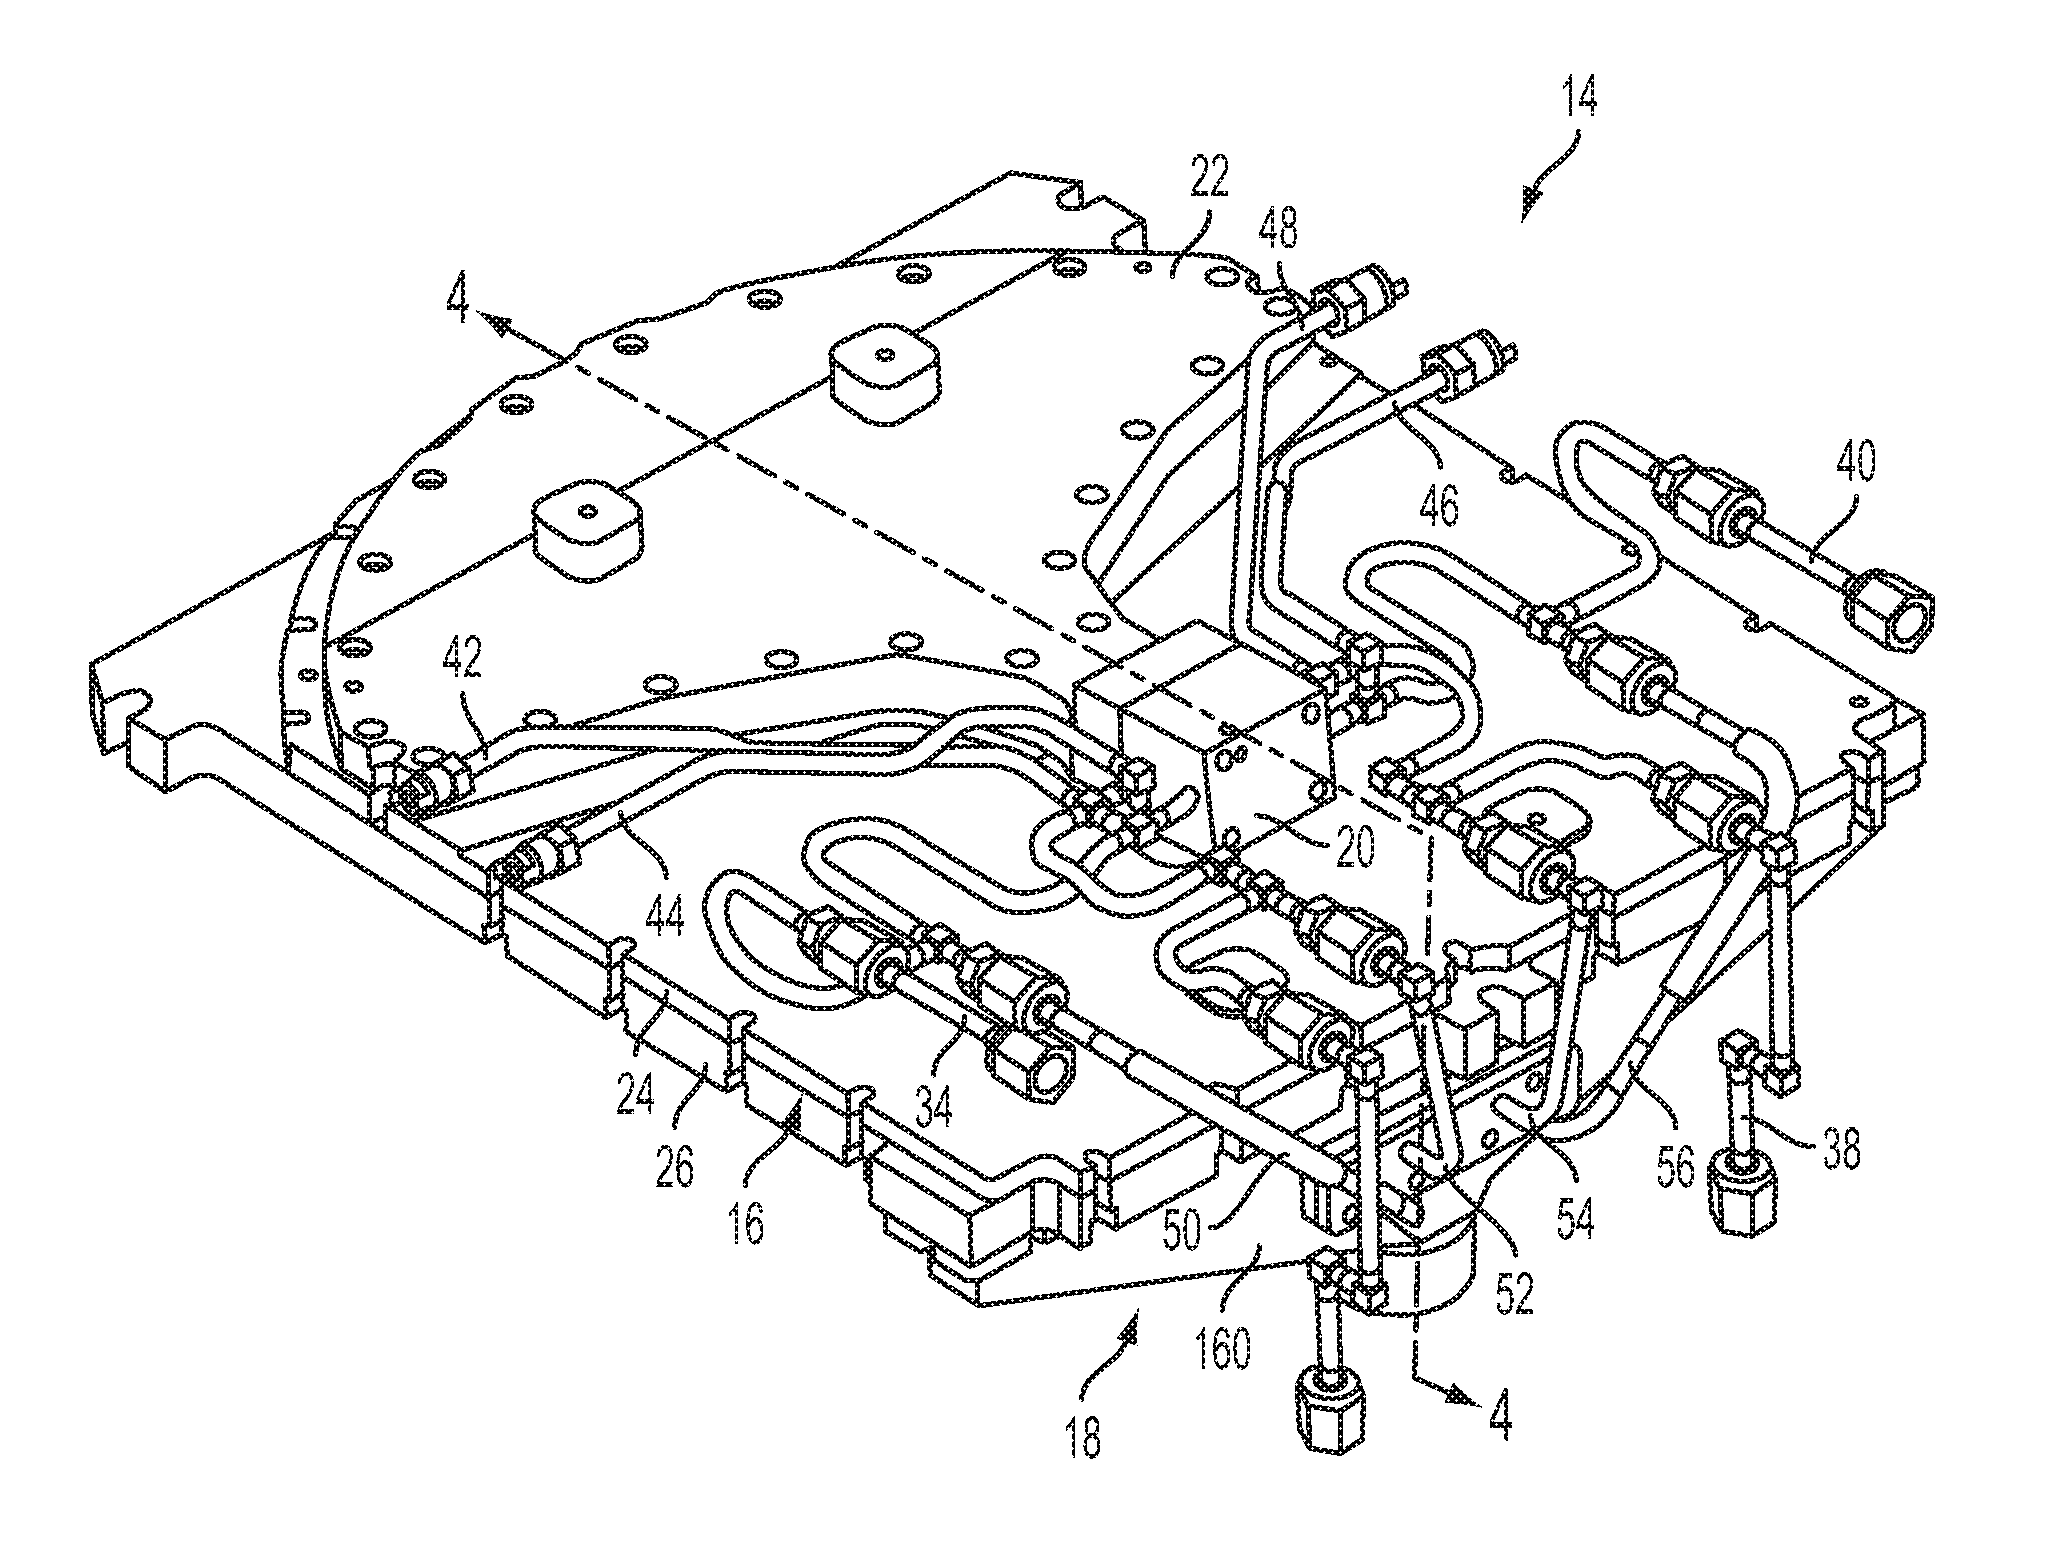 Semiconductor processing reactor and components thereof